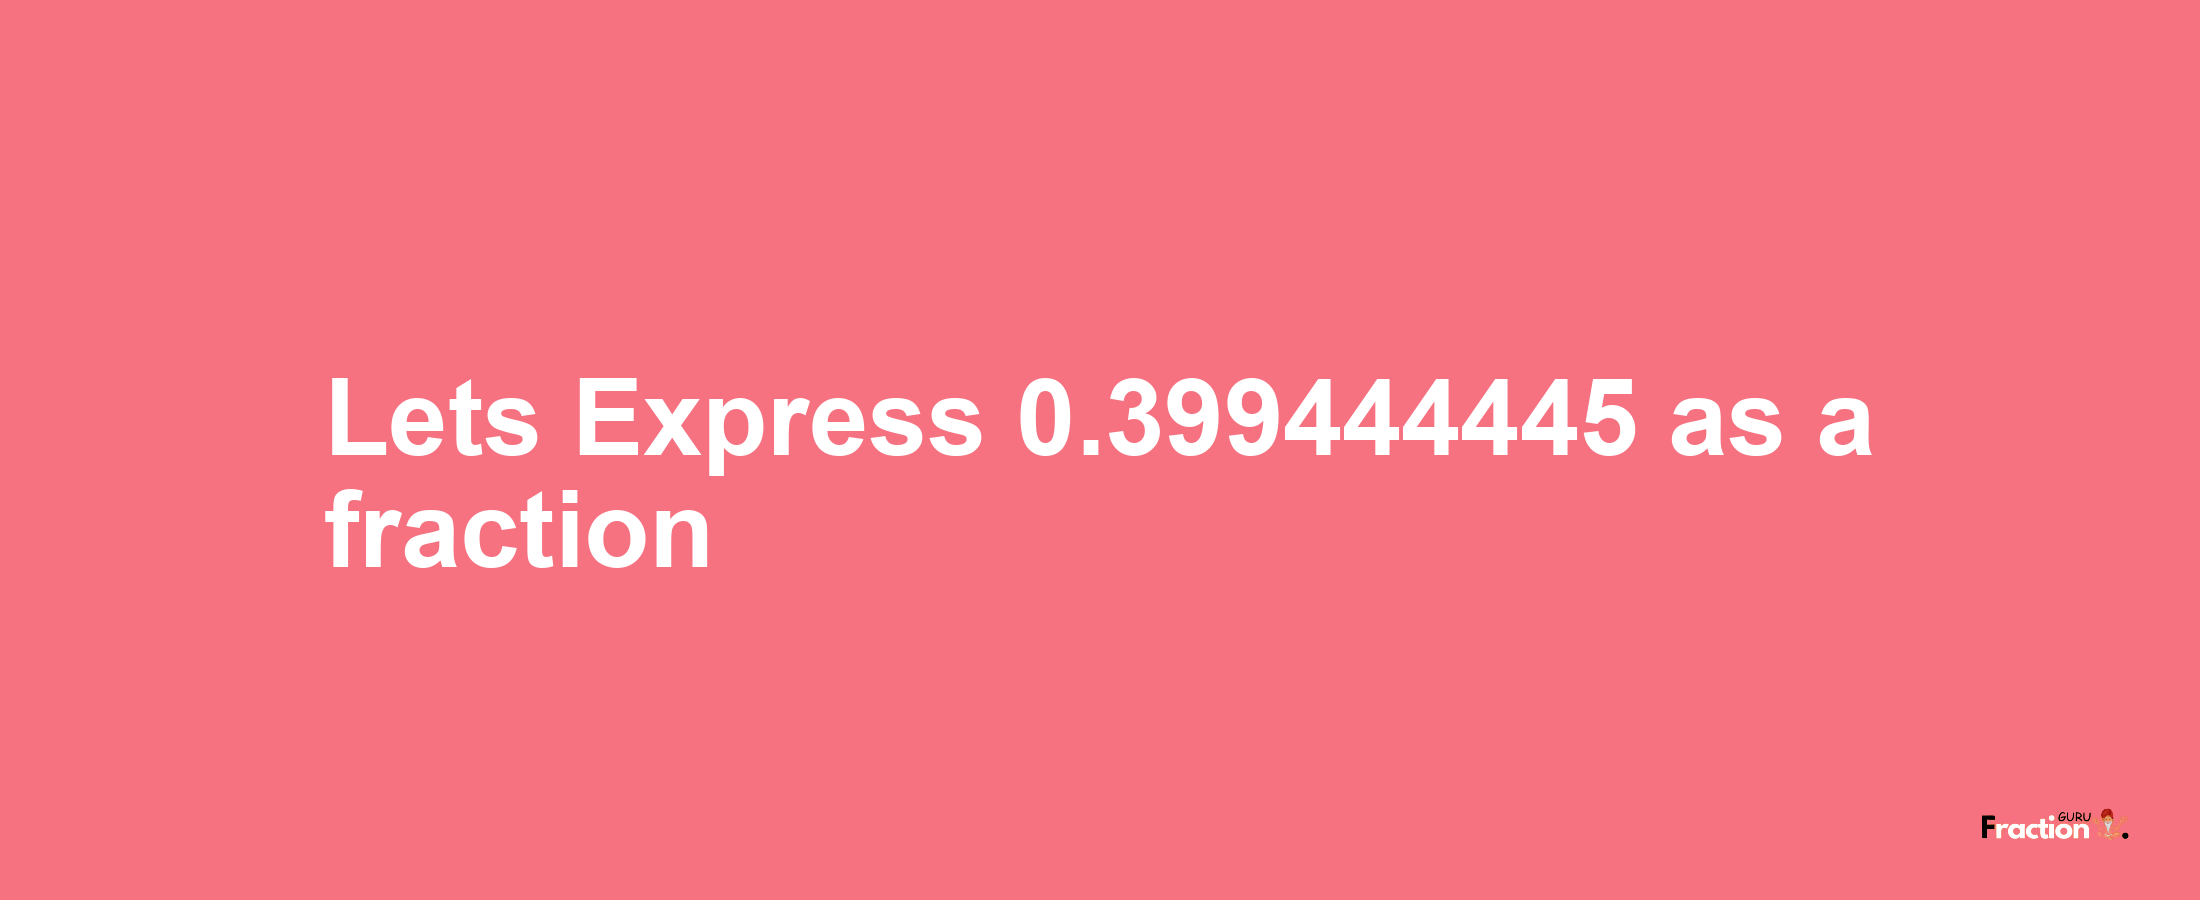 Lets Express 0.399444445 as afraction